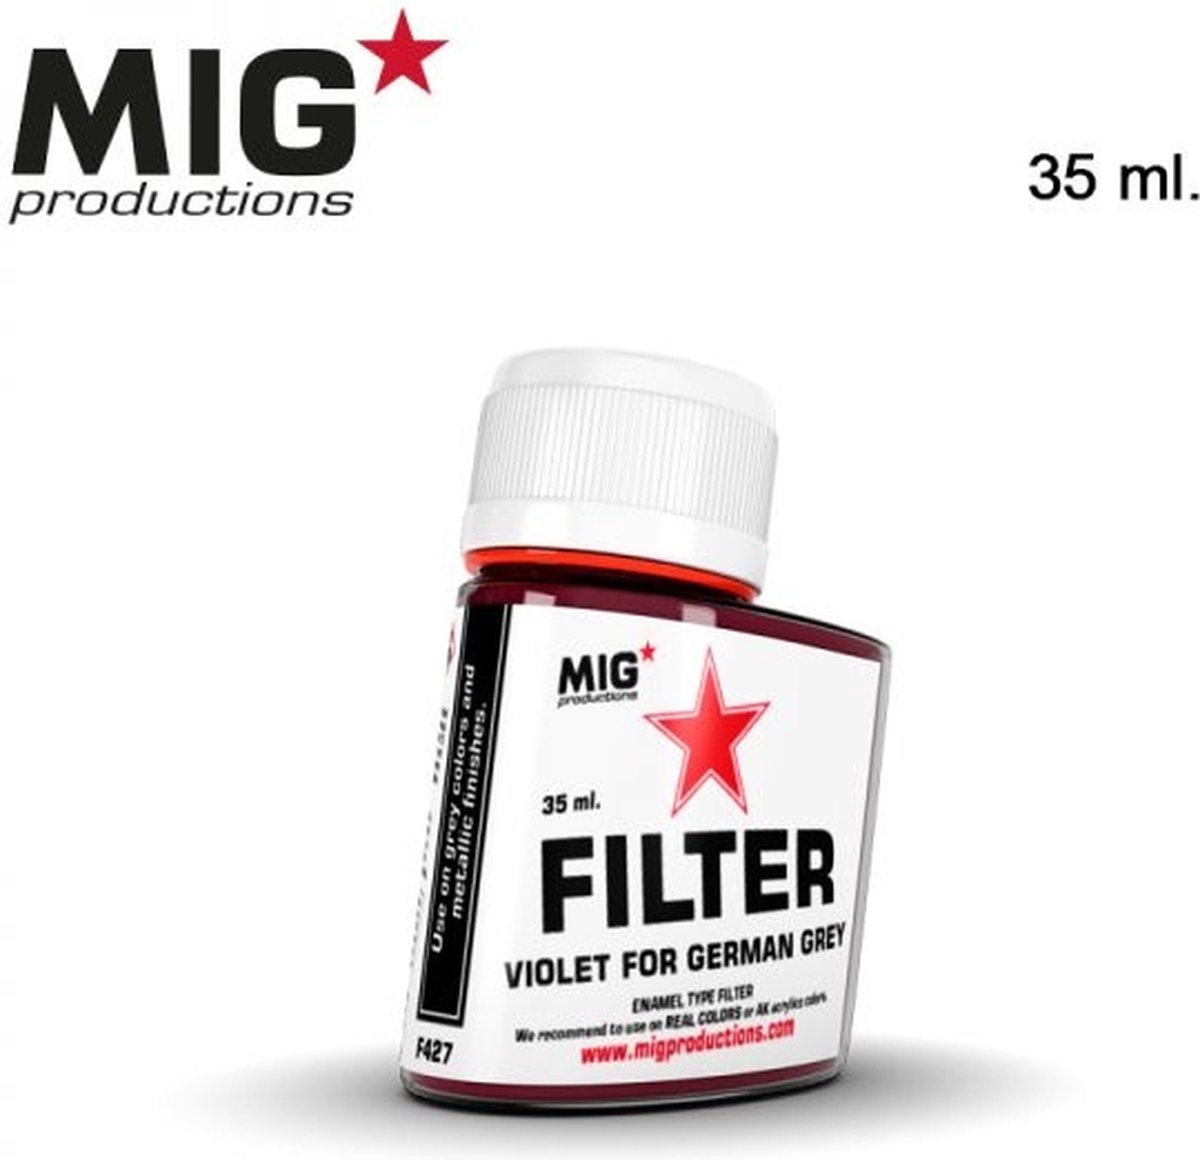 MIG Productions - F427 - Violet Filter for German Grey - 35ml